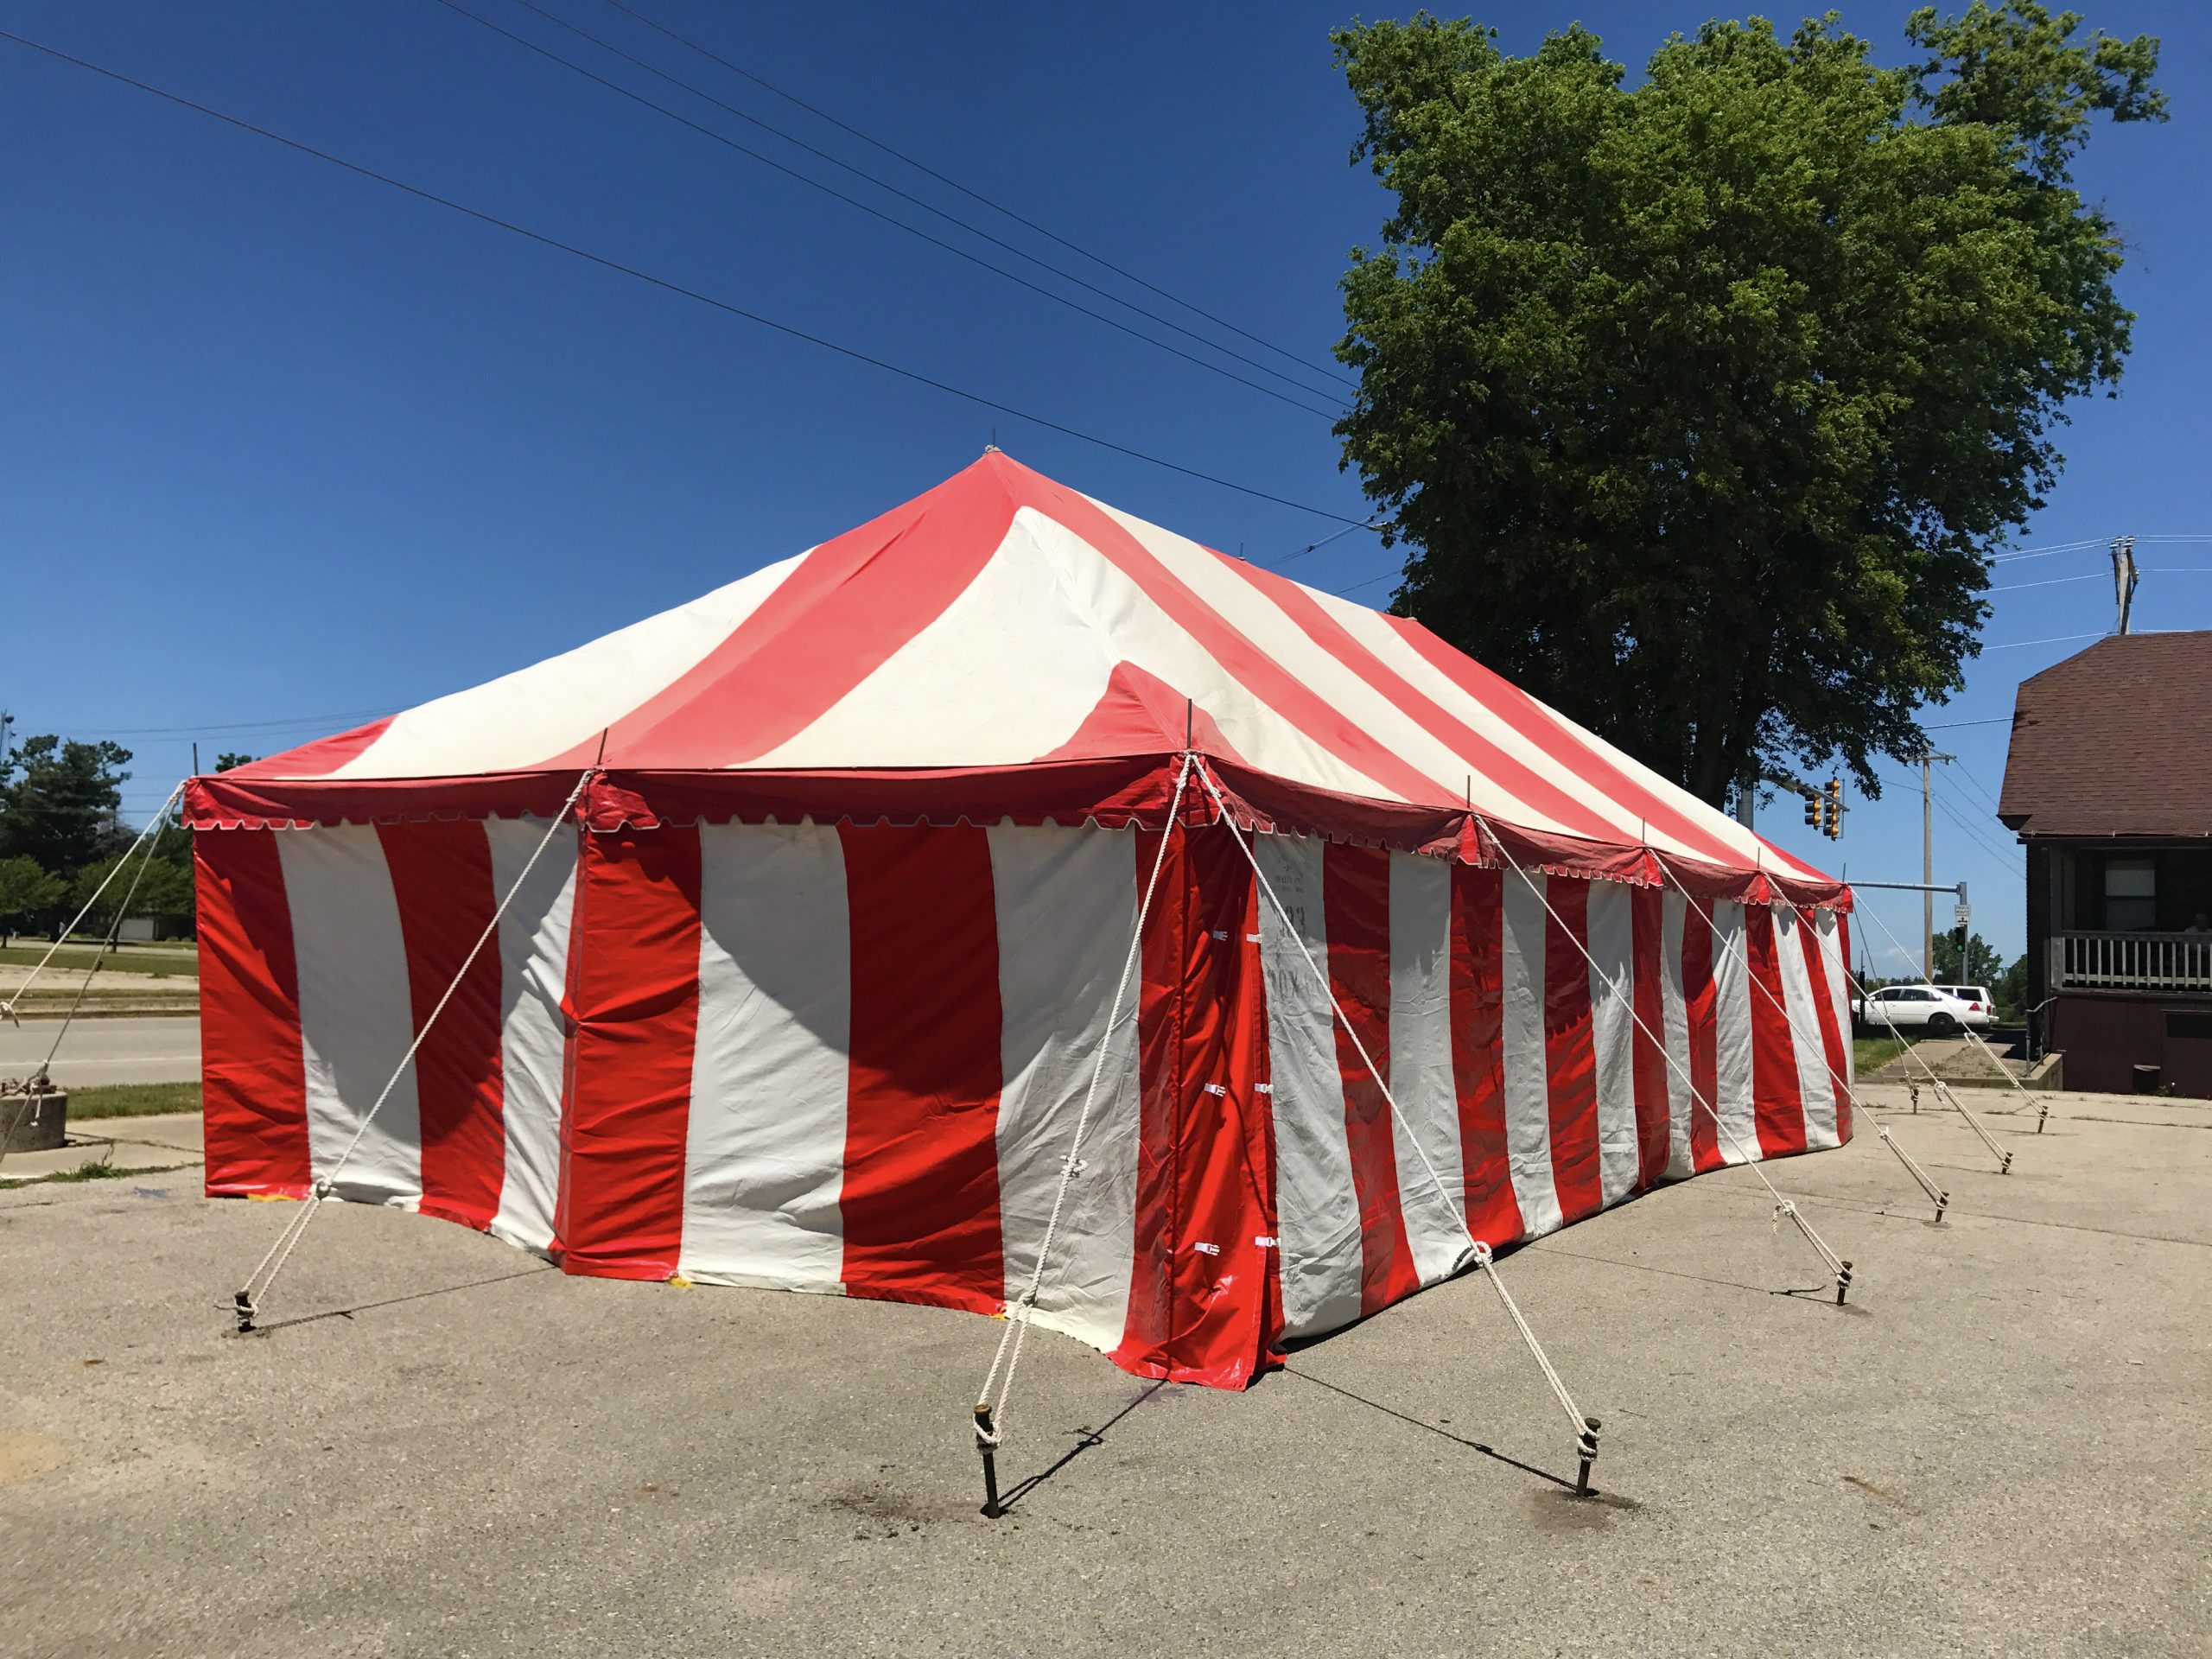 Outside of 20' x 40' rope and pole Fireworks tent for Ka-Boomers Fireworks in Newton, Iowa